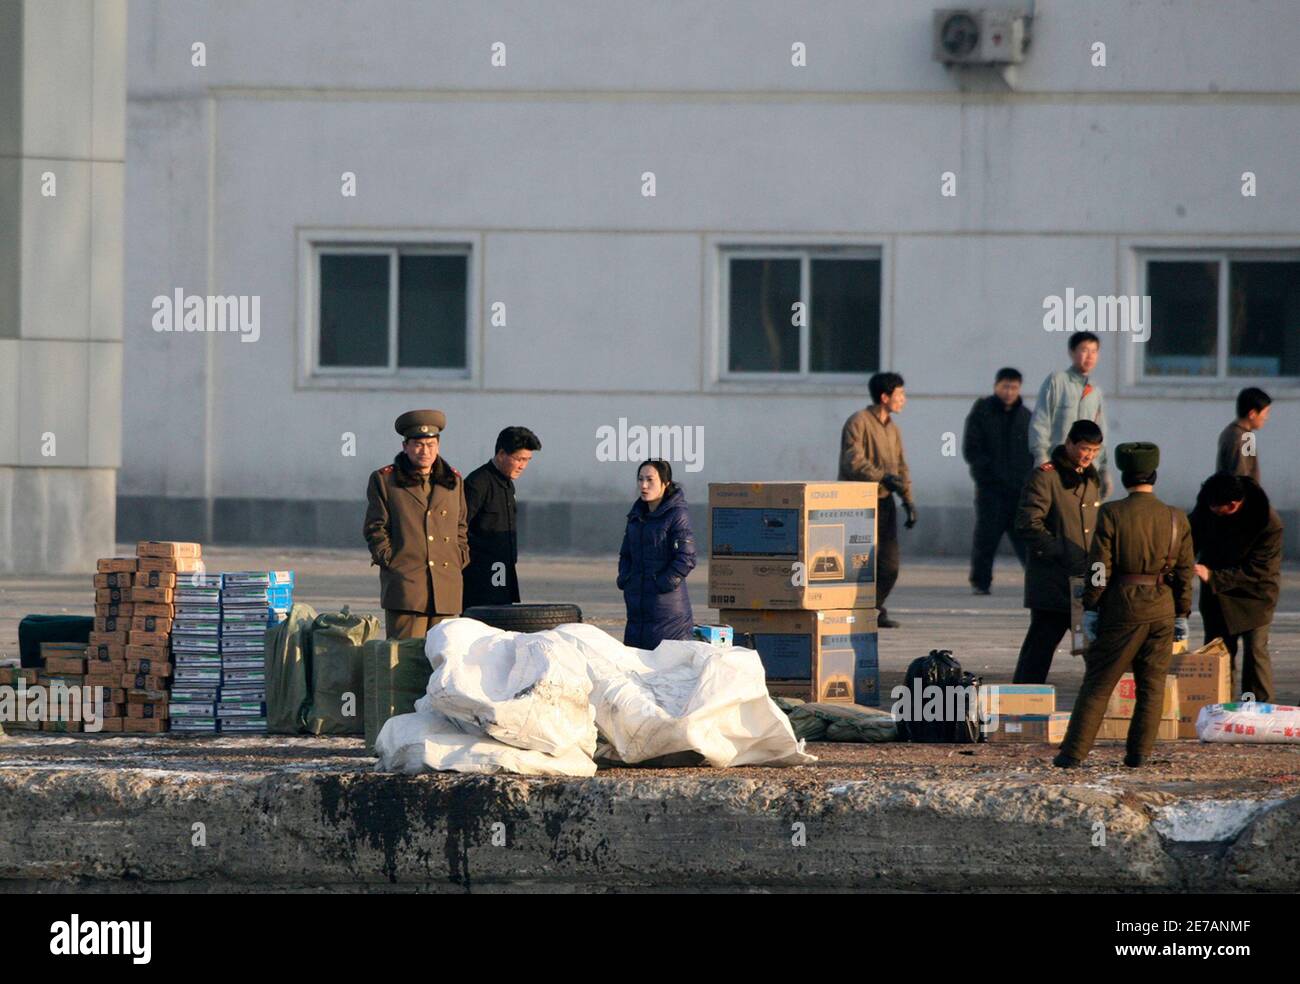 North Korean soldiers stand with goods transported from China on the banks of Yalu River near the North Korean town of Sinuiju, opposite the Chinese border city of Dandong January 8, 2010. North Korea on Tuesday shut a customs house in the northwest part of the country near the Chinese border city of Dandong, closing the region, and sent police to reinforce the rail link, Japan's Nihon Keizai newspaper reported, indicating leader Kim Jong-il may be about to visit his neighbour and biggest benefactor, a report said on Wednesday. REUTERS/Jacky Chen (NORTH KOREA - Tags: POLITICS MILITARY) Stock Photo